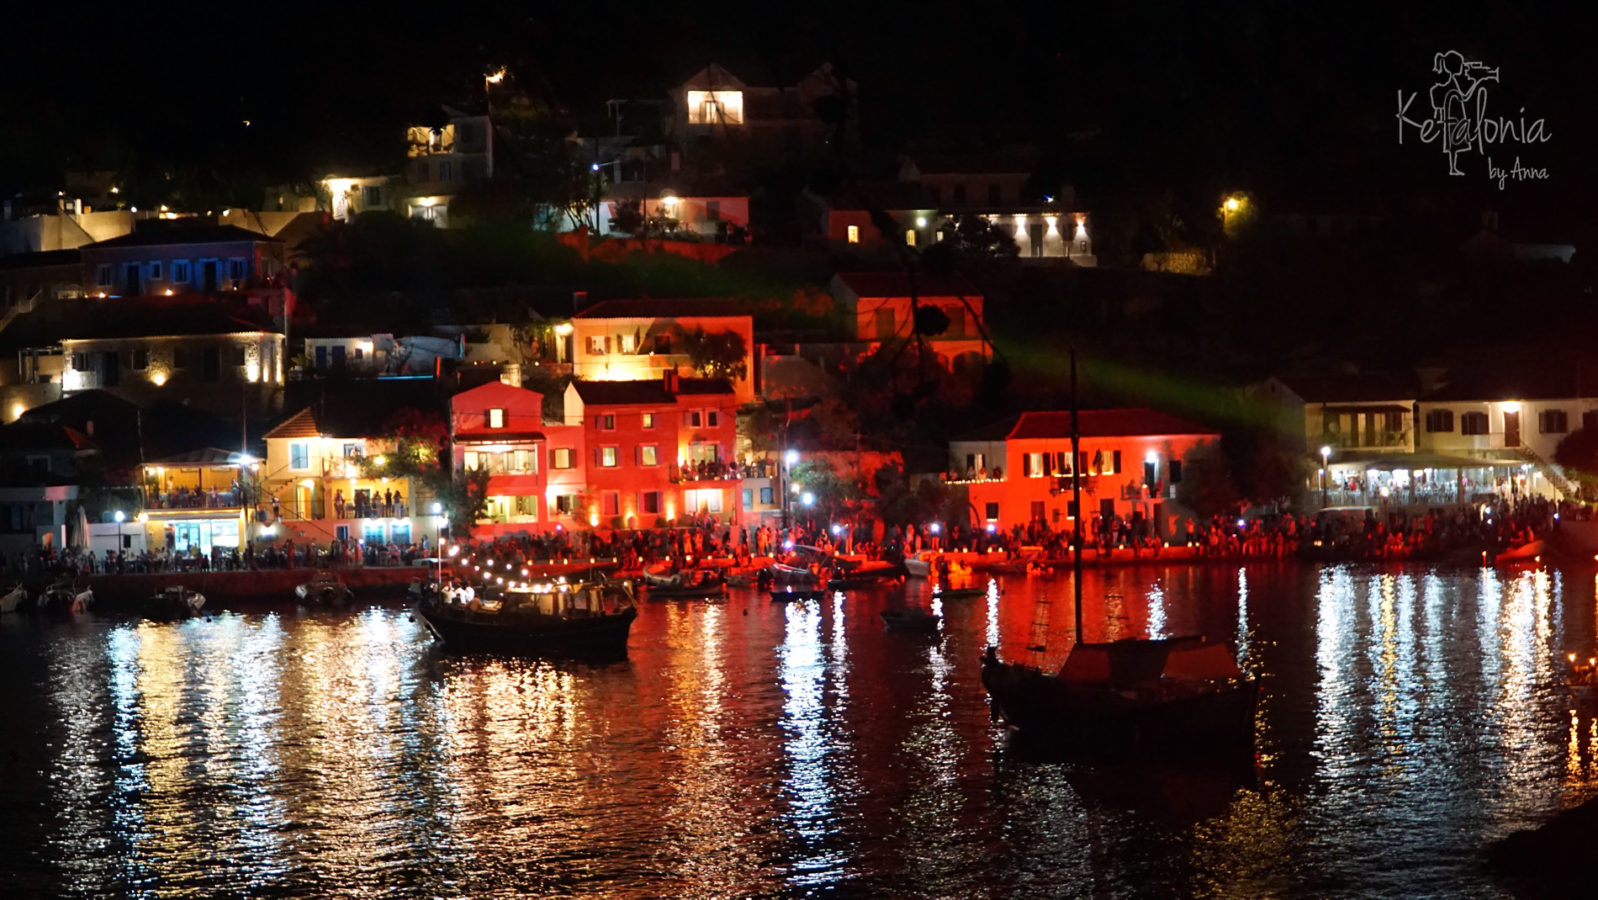 The Βarcarolle (or Varkarolla) Festival is held every year on the 24th of August at the beautiful village of Assos as well as in Lixouri and Argostoli.